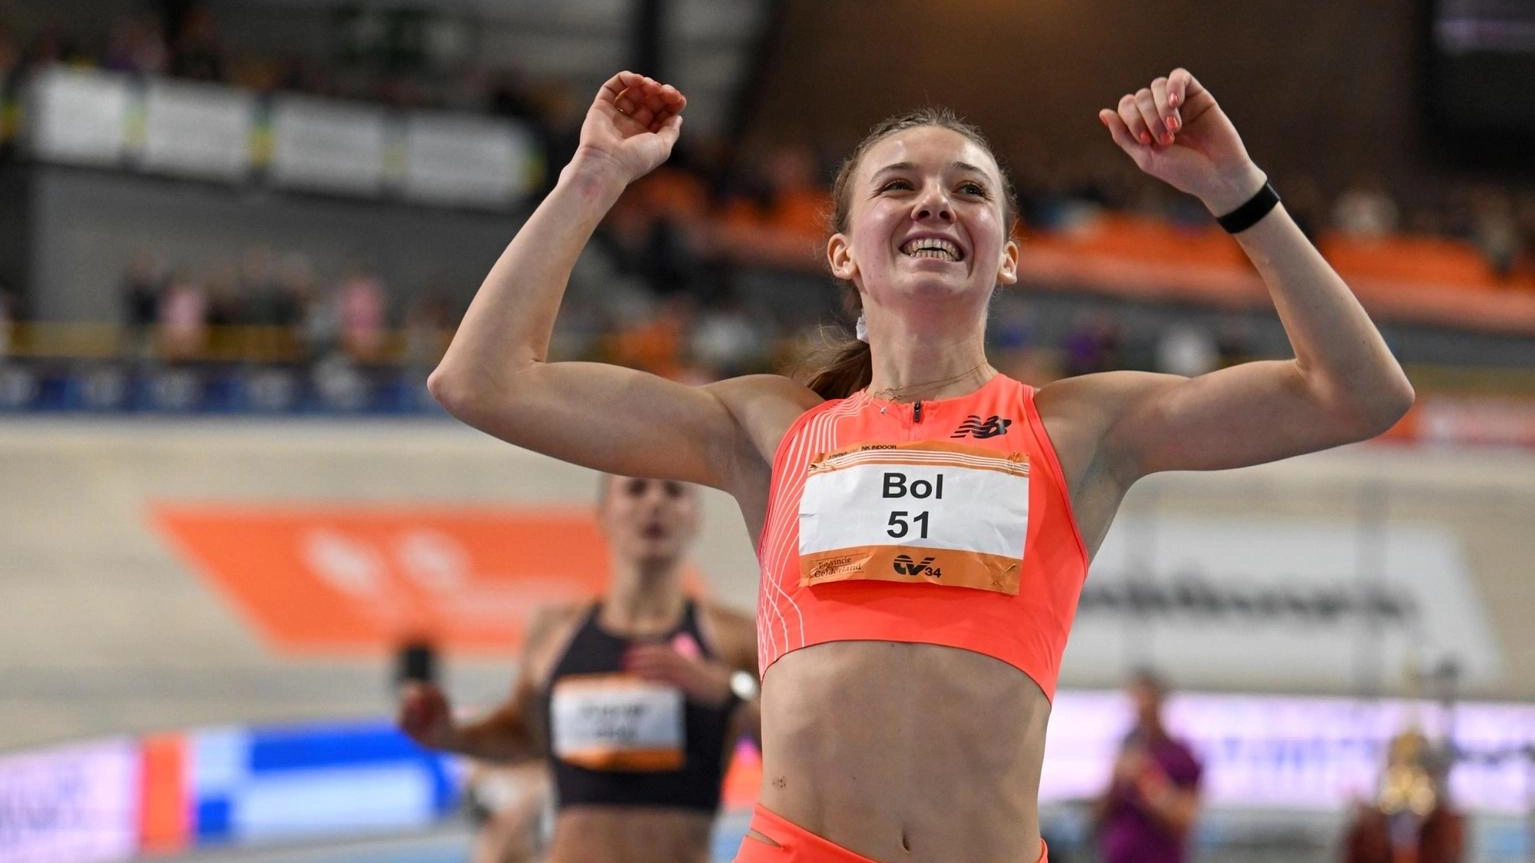 Atletica: Bol stabilisce record mondiale 400 m indoor donne